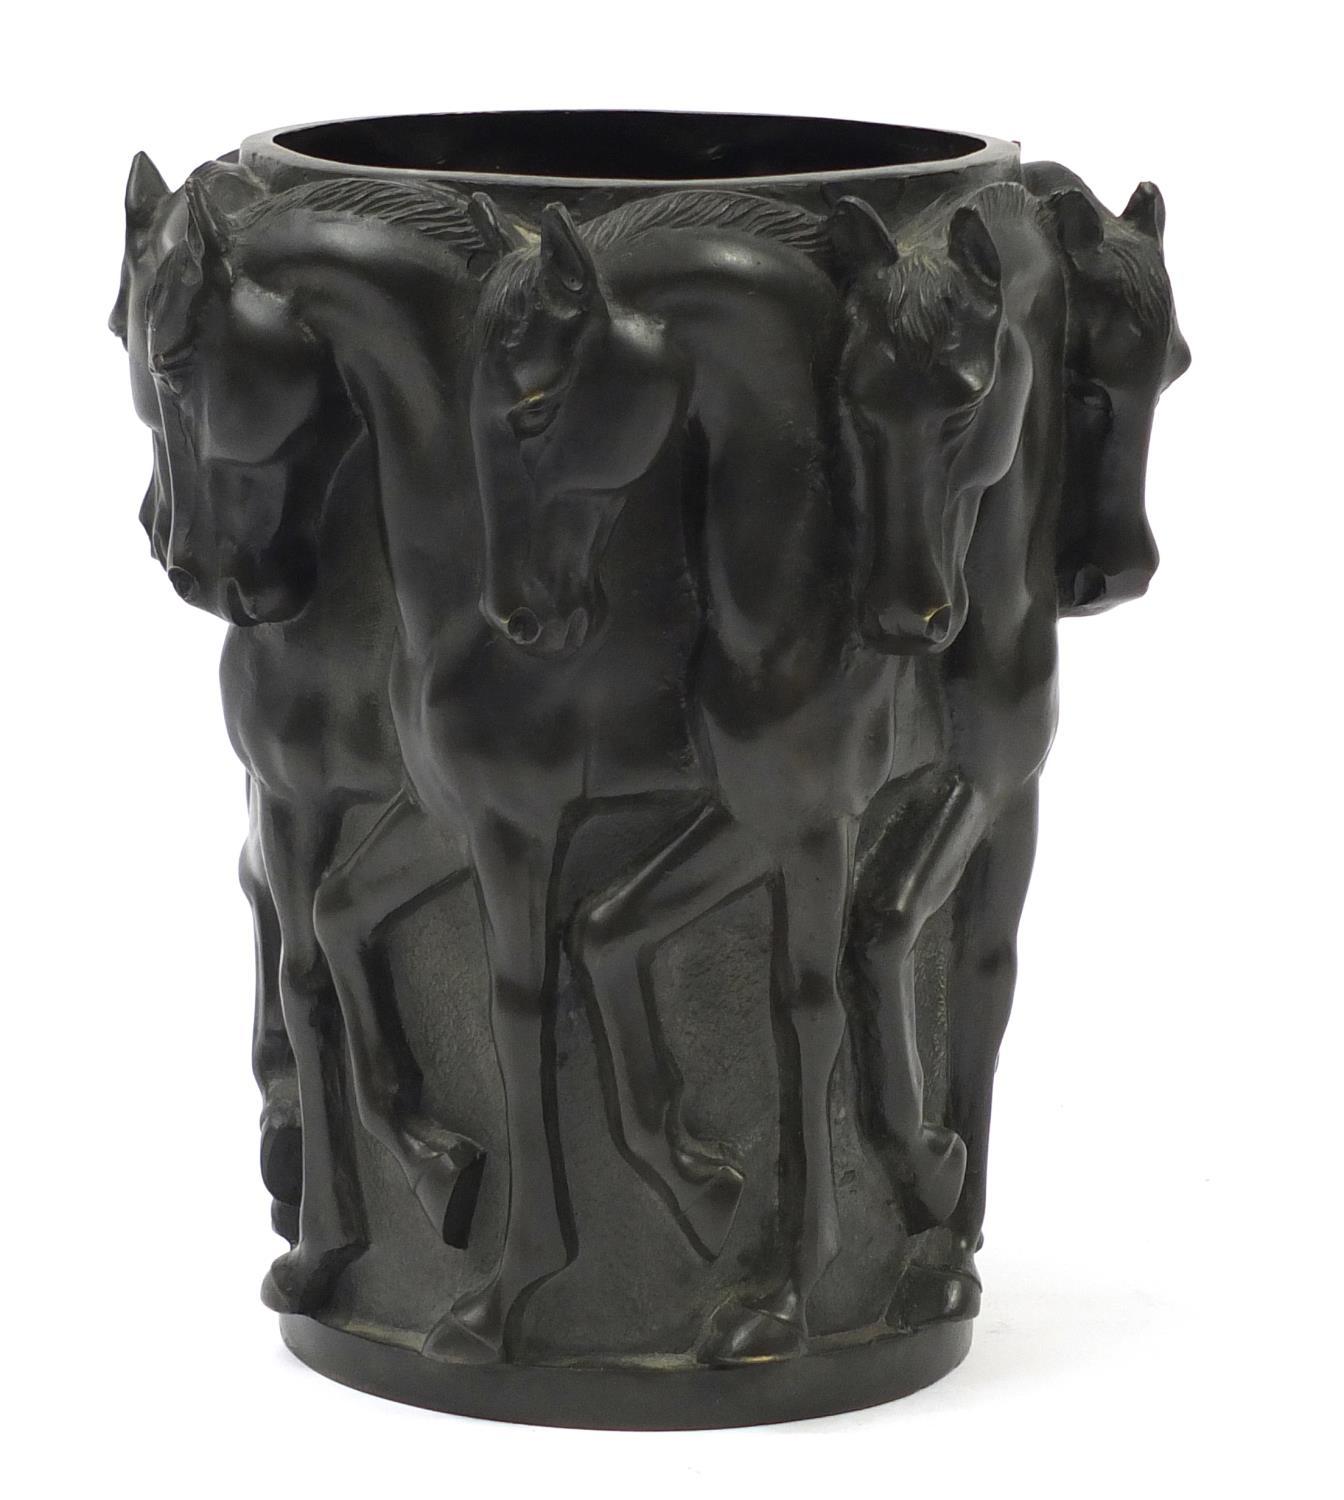 French Art Deco patinated bronze Maharajah thoroughbred wine cooler cast with a continuous band of - Image 4 of 8